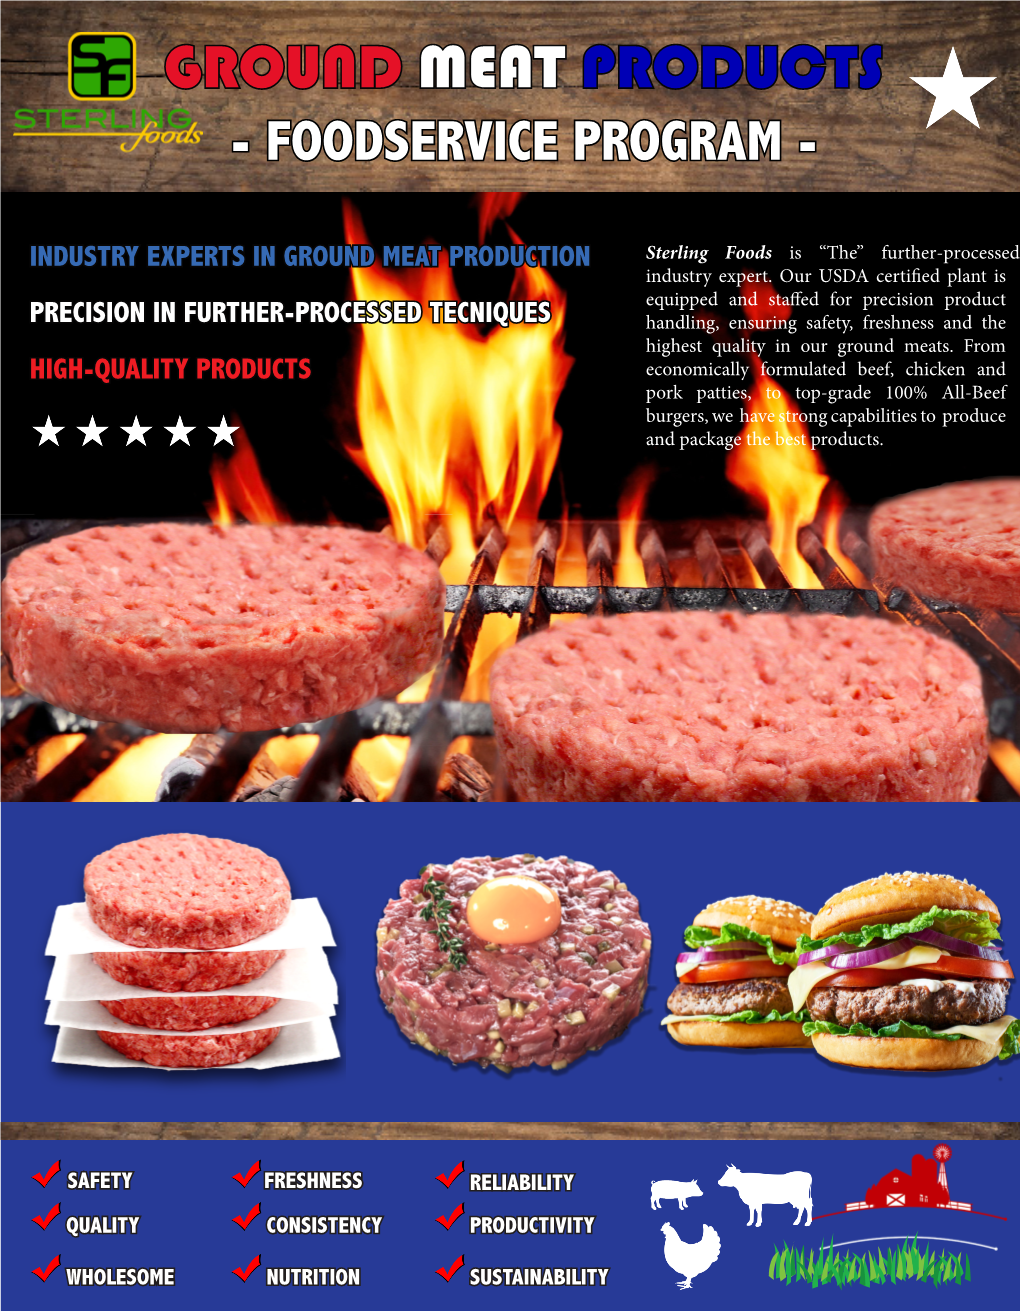 Ground Meat Products - Foodservice Program